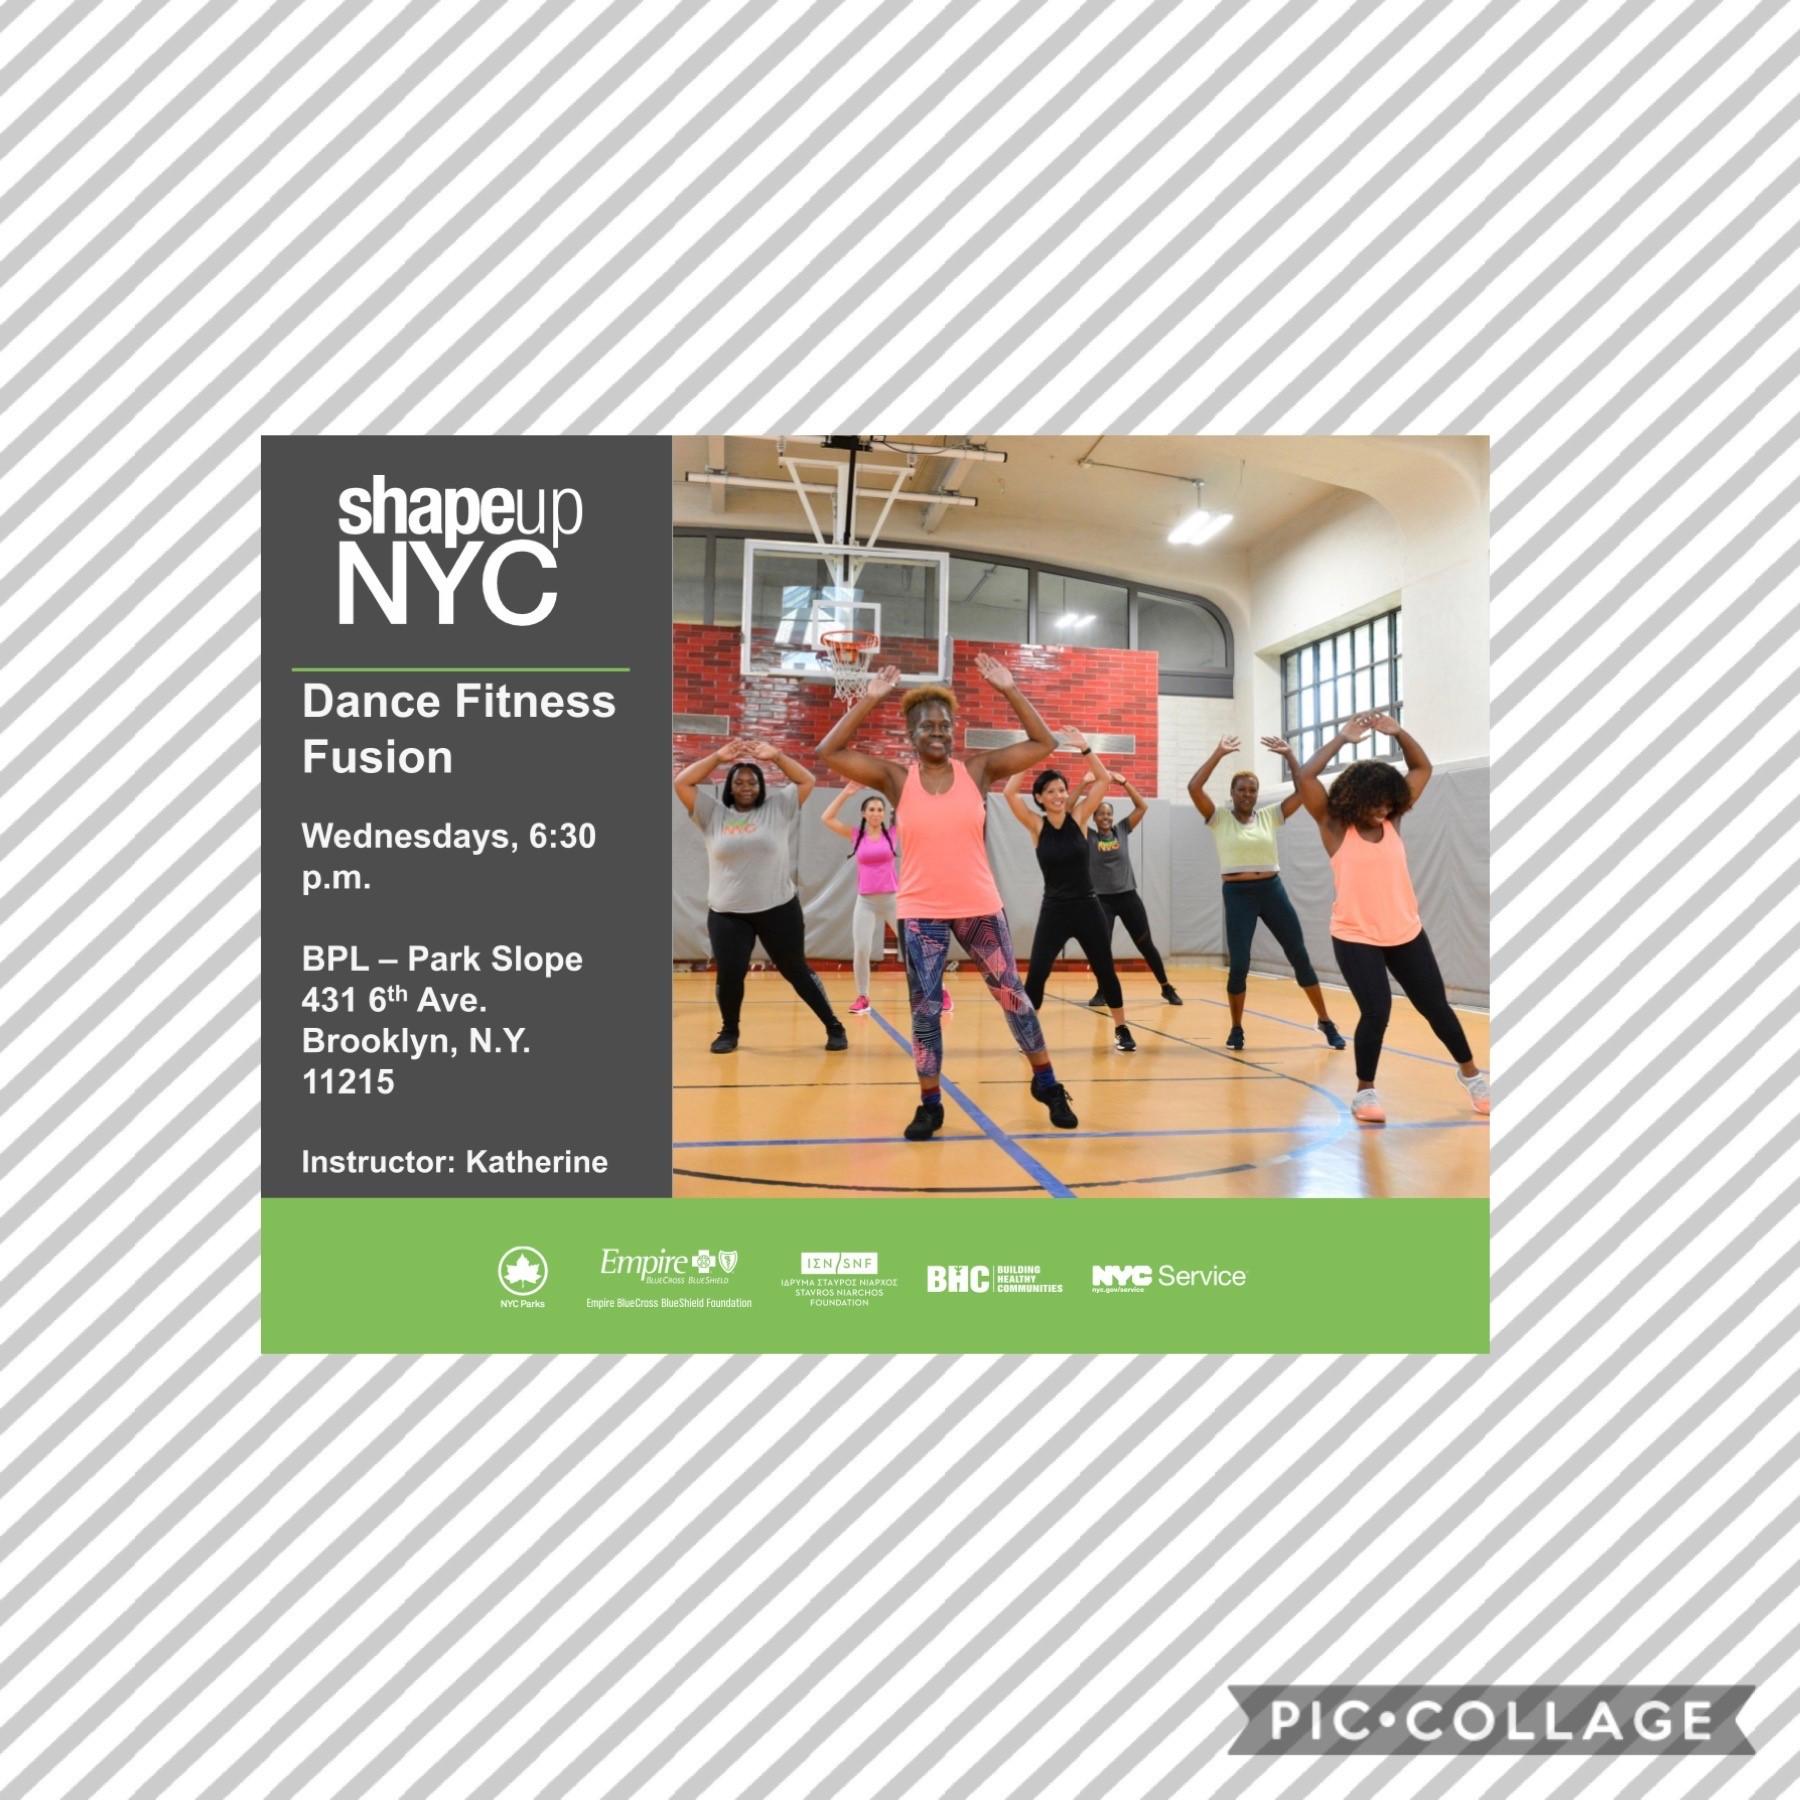 Shape Up NYC - Dance Fitness Fusion